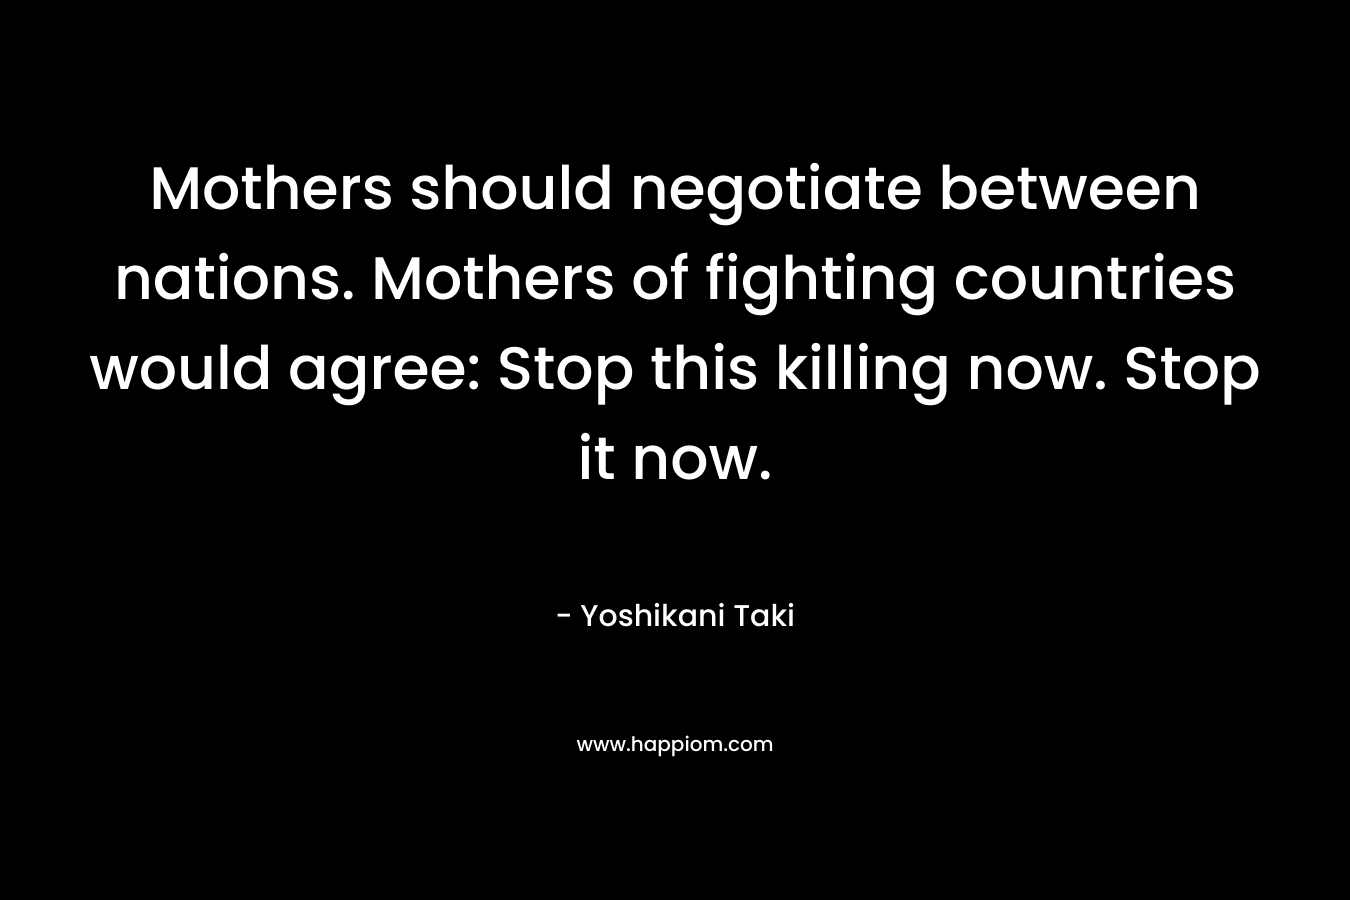 Mothers should negotiate between nations. Mothers of fighting countries would agree: Stop this killing now. Stop it now. – Yoshikani Taki